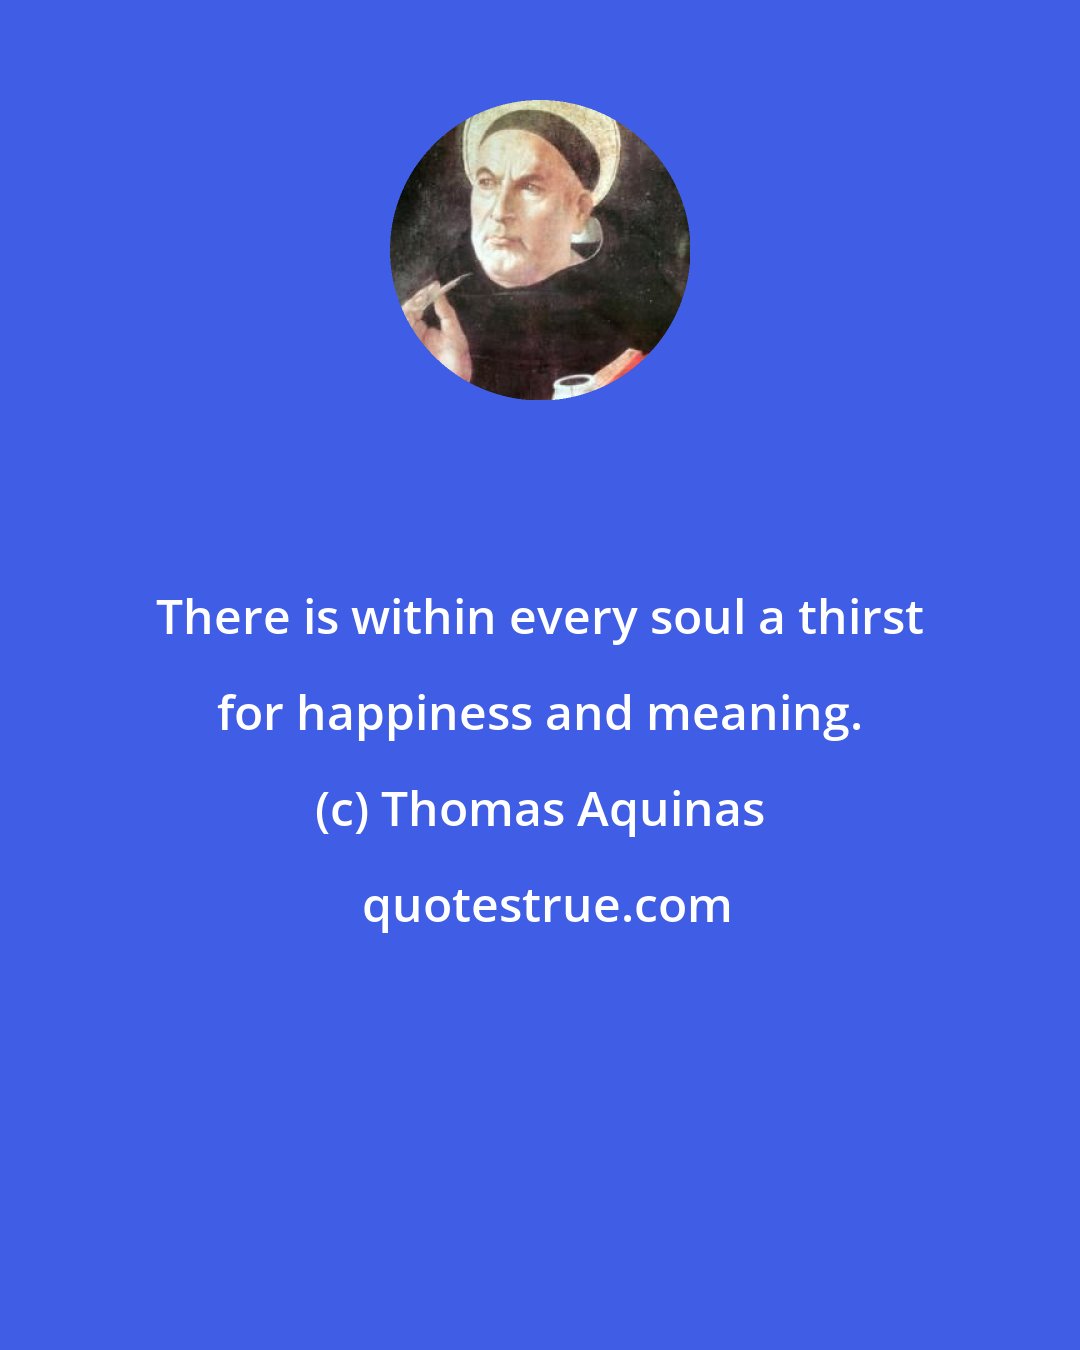 Thomas Aquinas: There is within every soul a thirst for happiness and meaning.